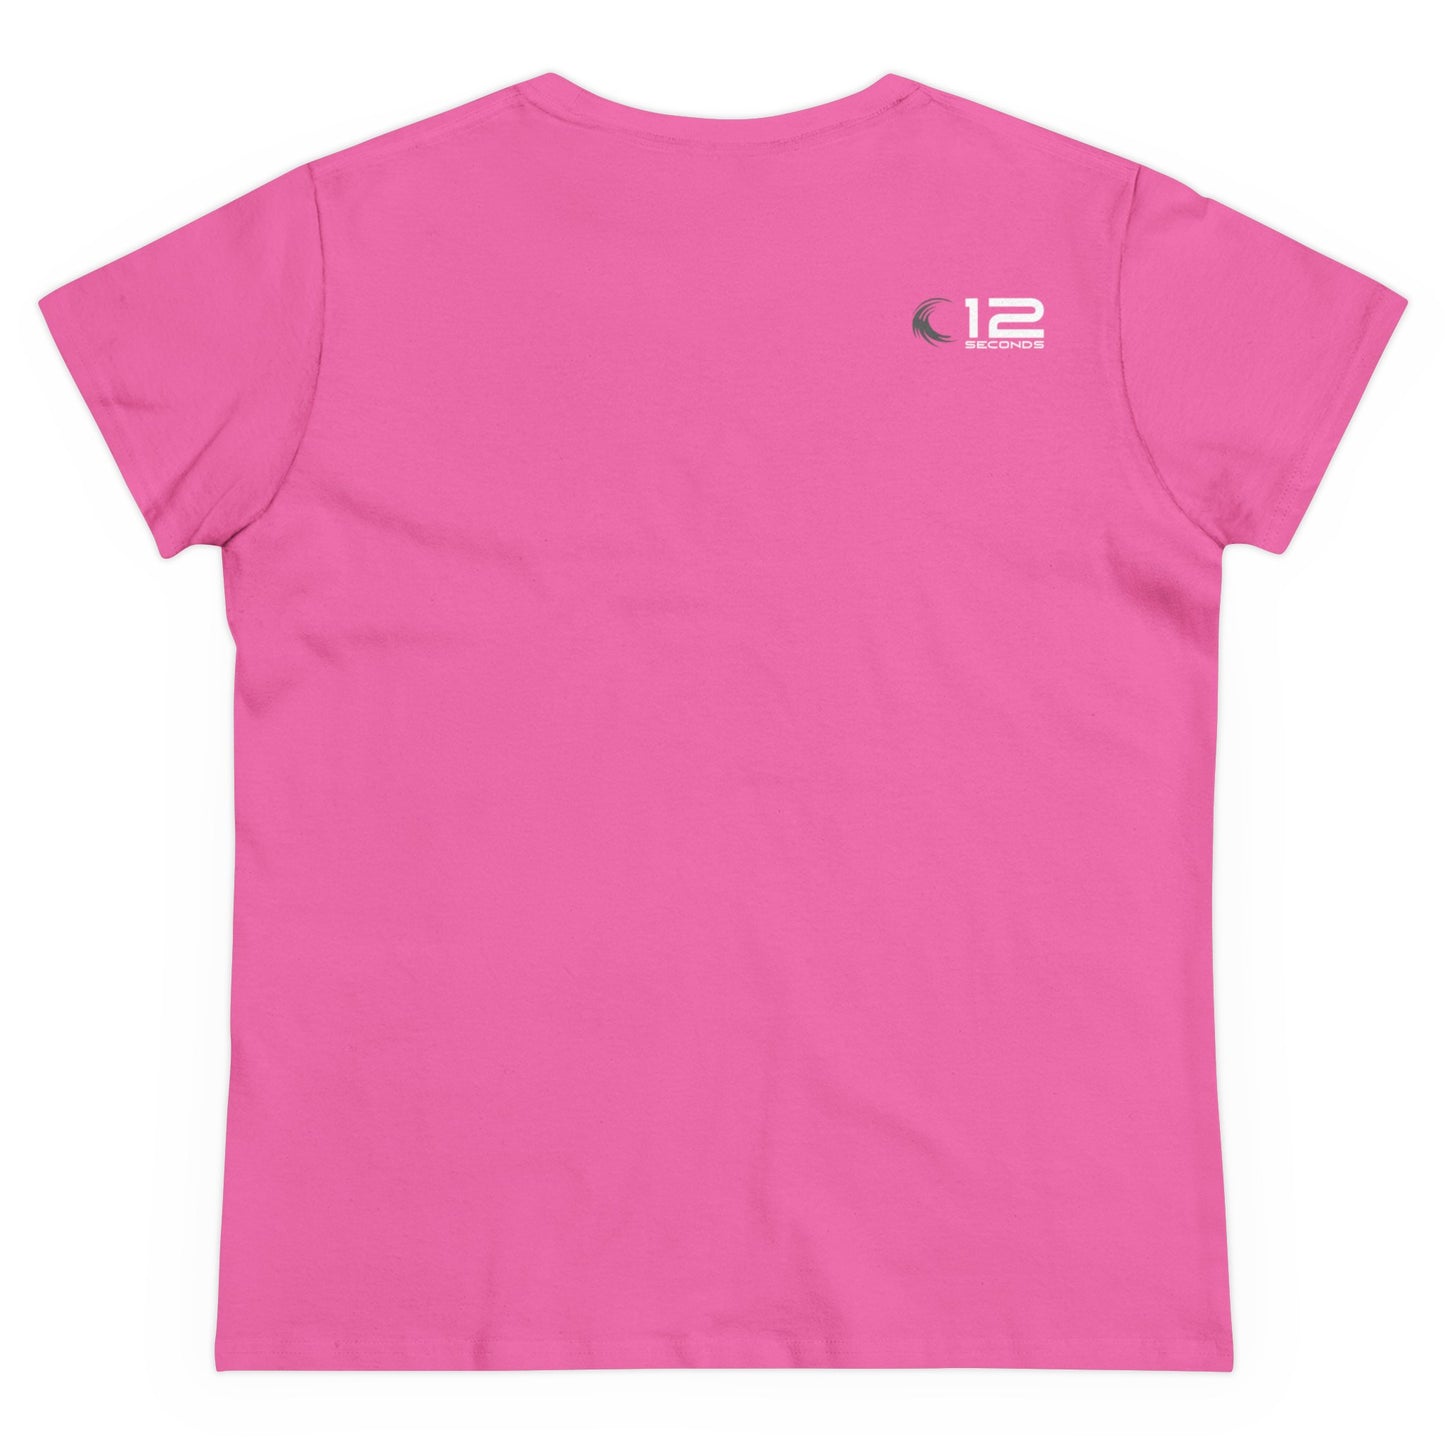 Women's Midweight Cotton Tee - KING PROTEA - 12 SECONDS APPAREL